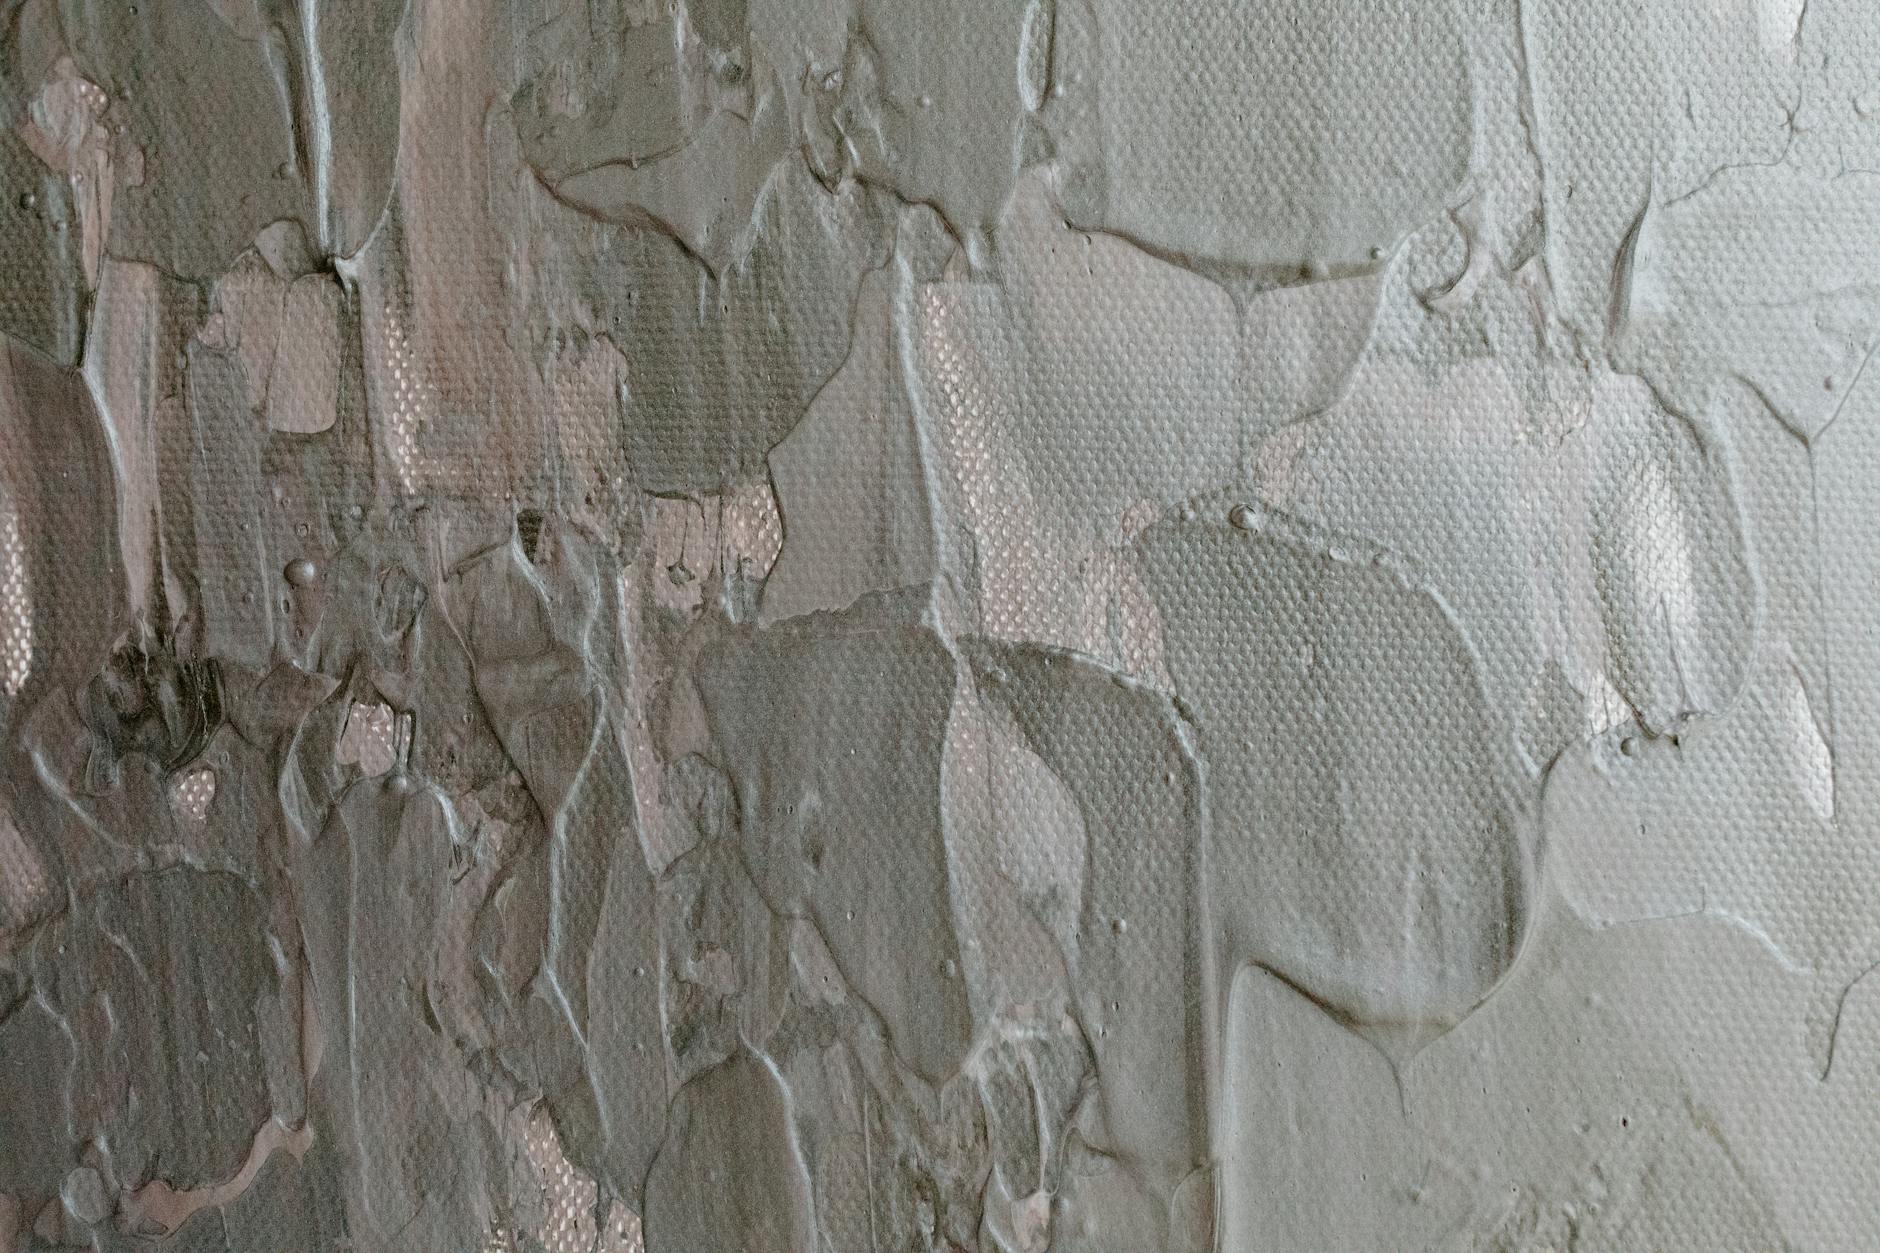 How Long Does Latex Paint Take to Dry? Find Out!